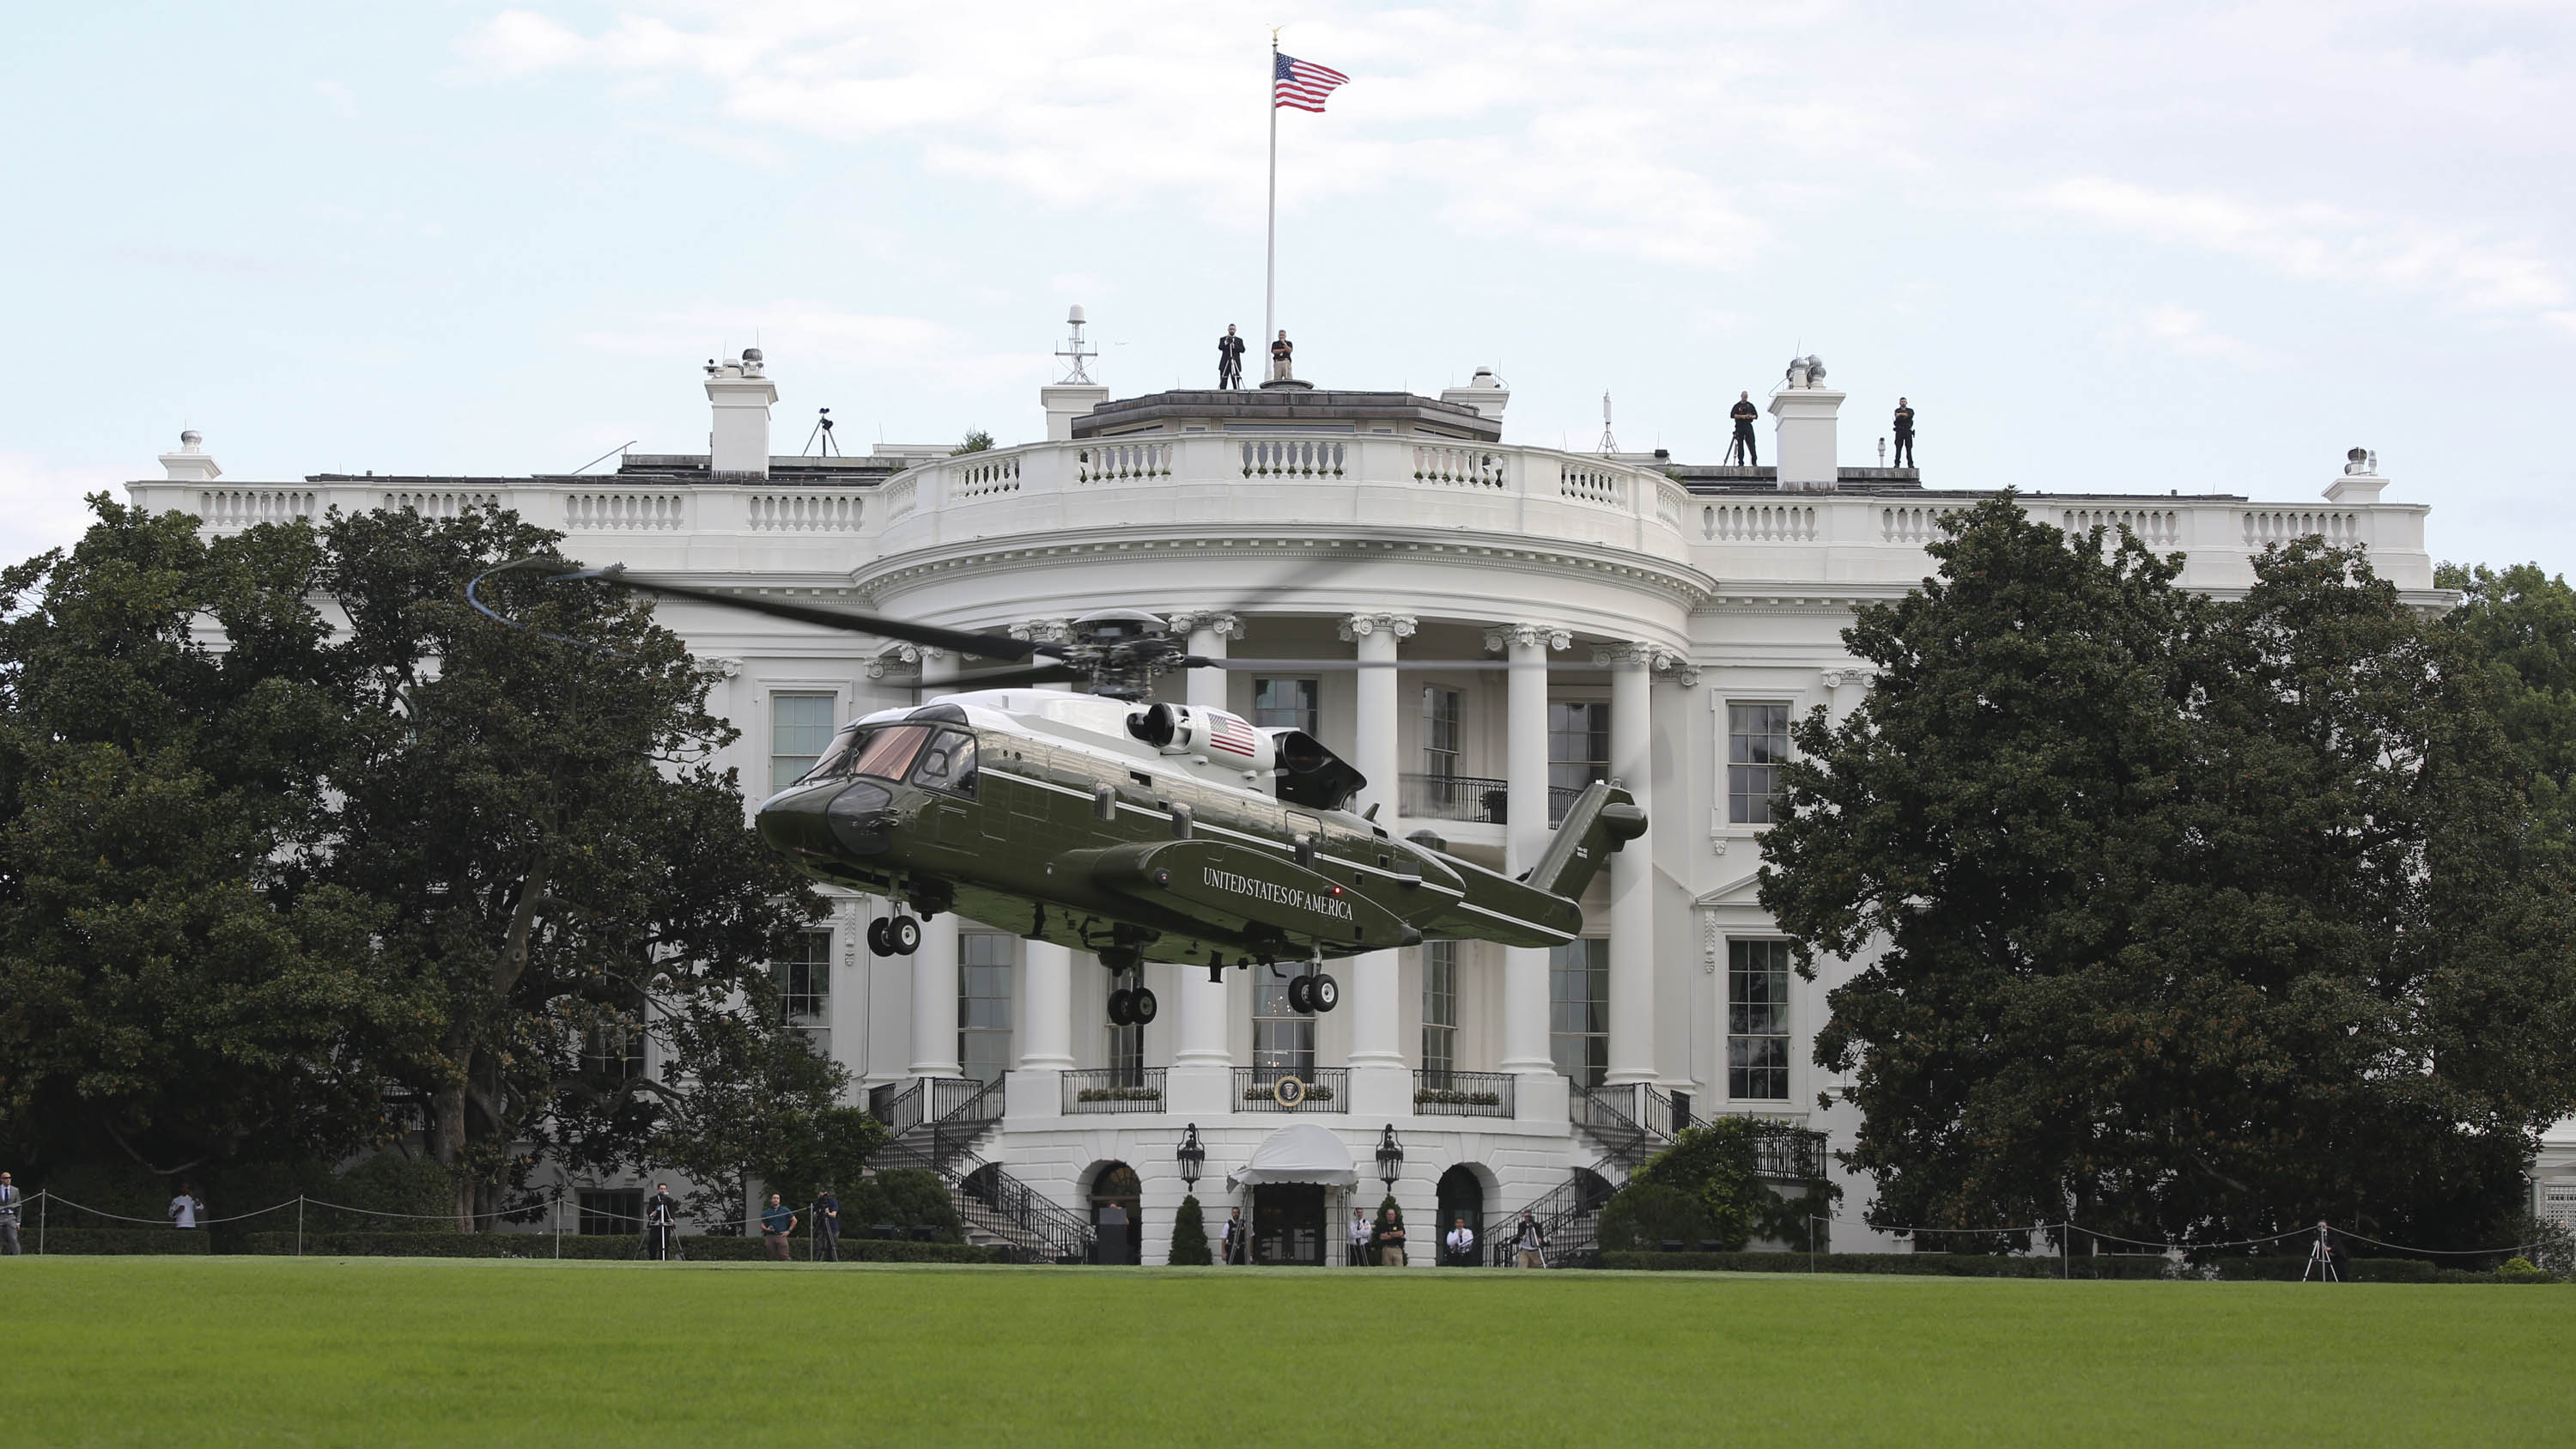 VH-92A presidential helicopter lands on White House South Lawn